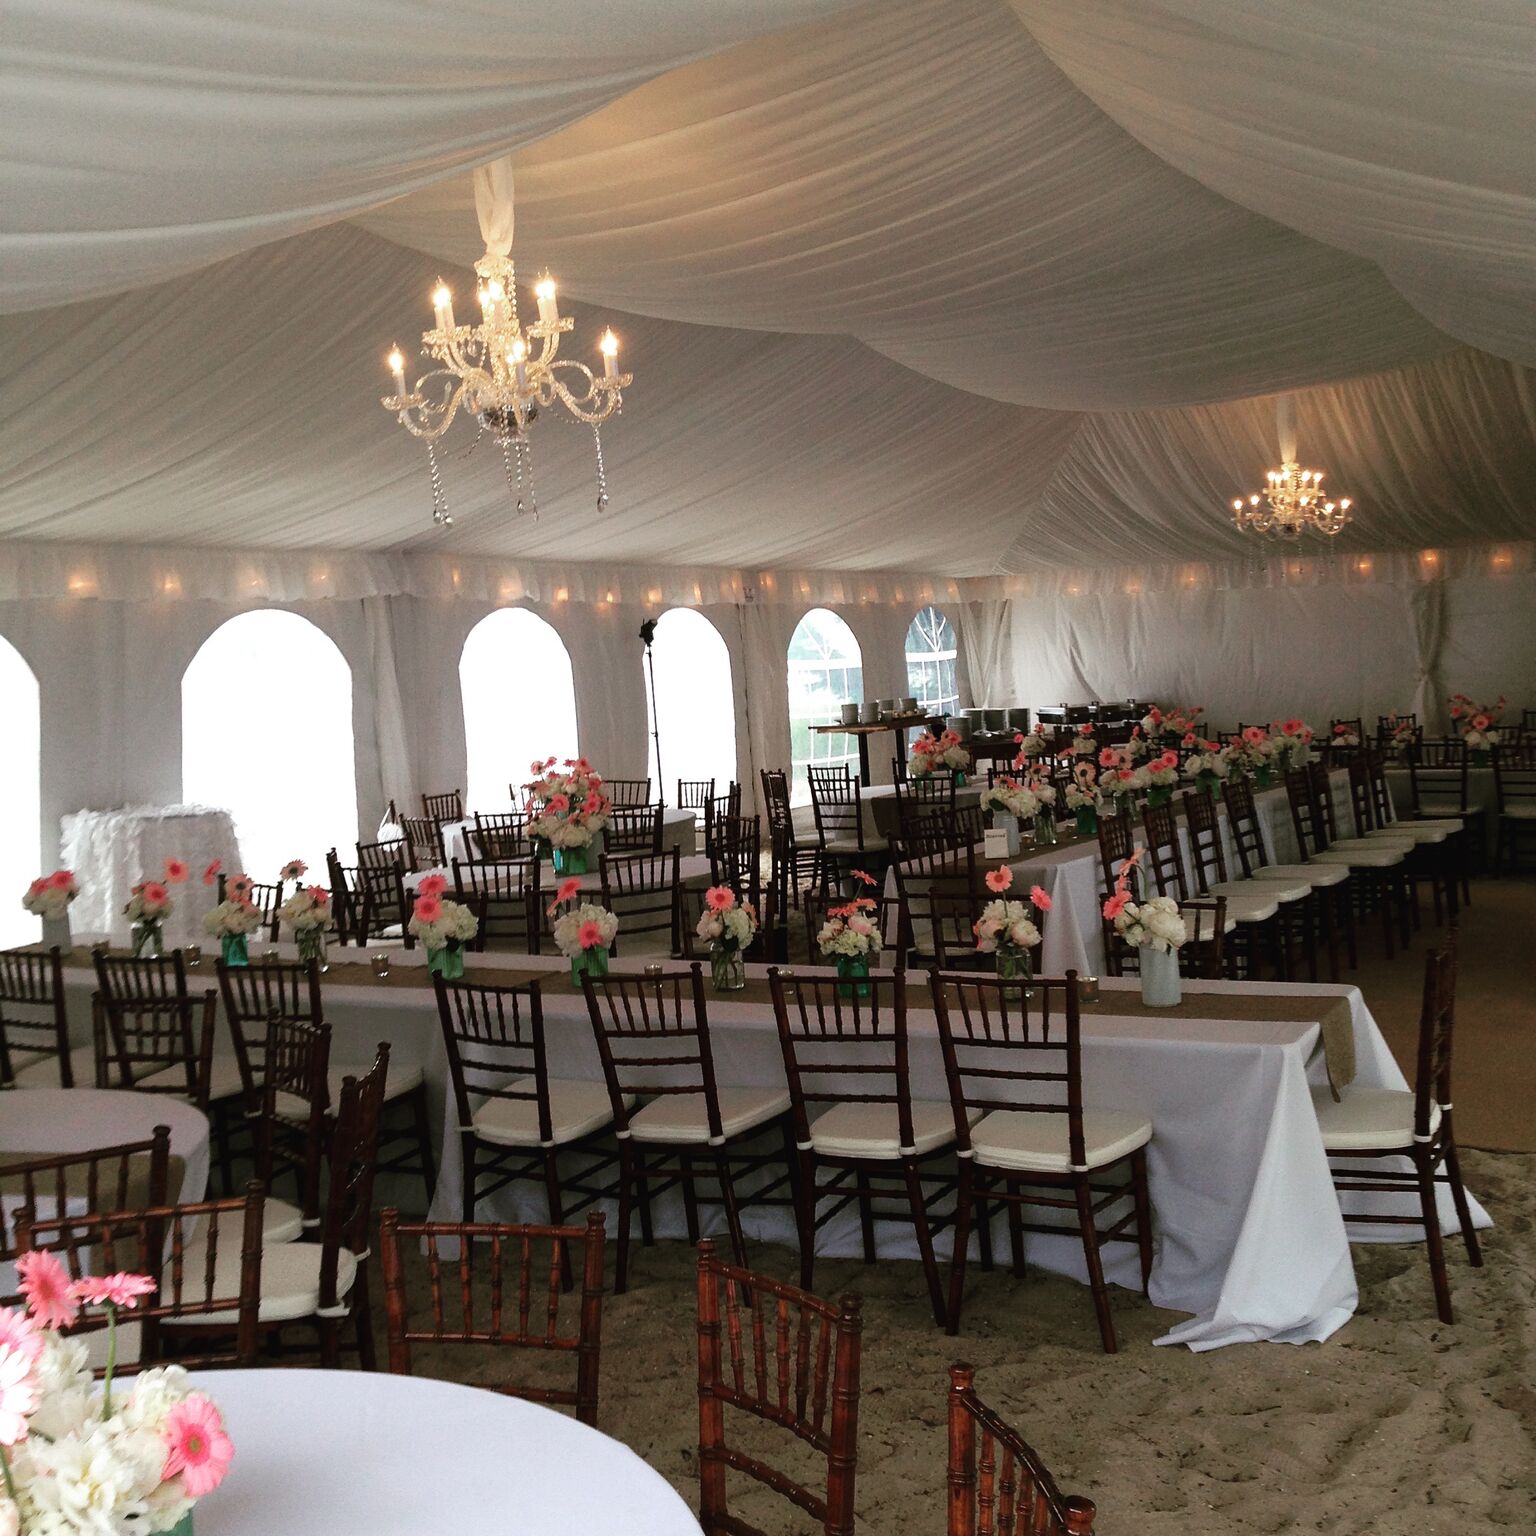 long wedding tables with pink and white flowers under a tent